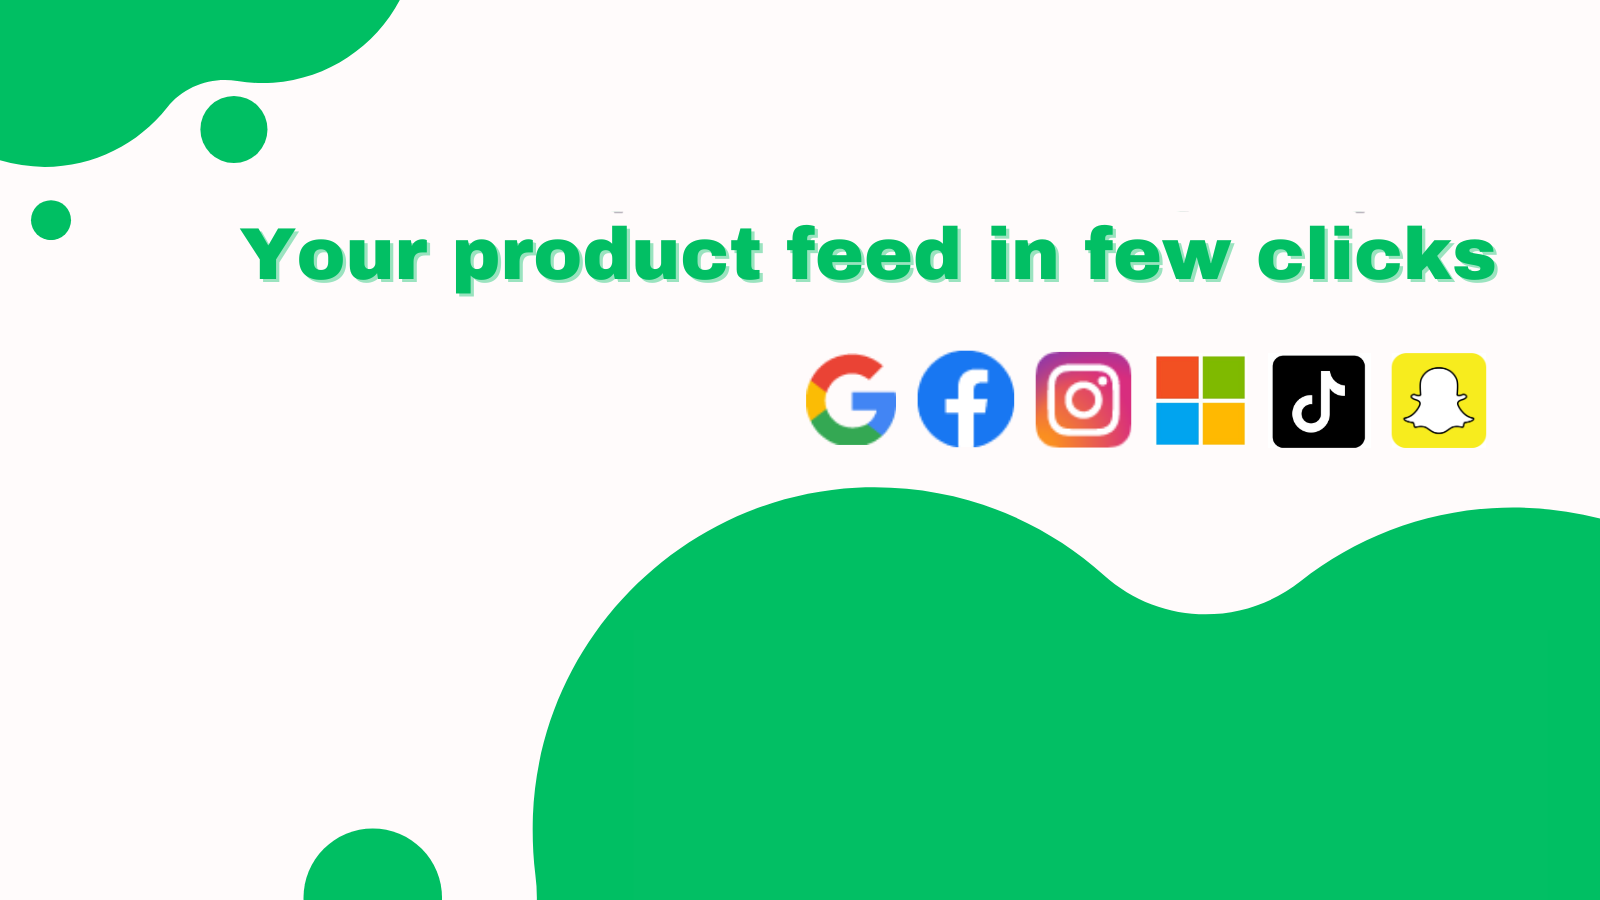 Your product feed in few clicks